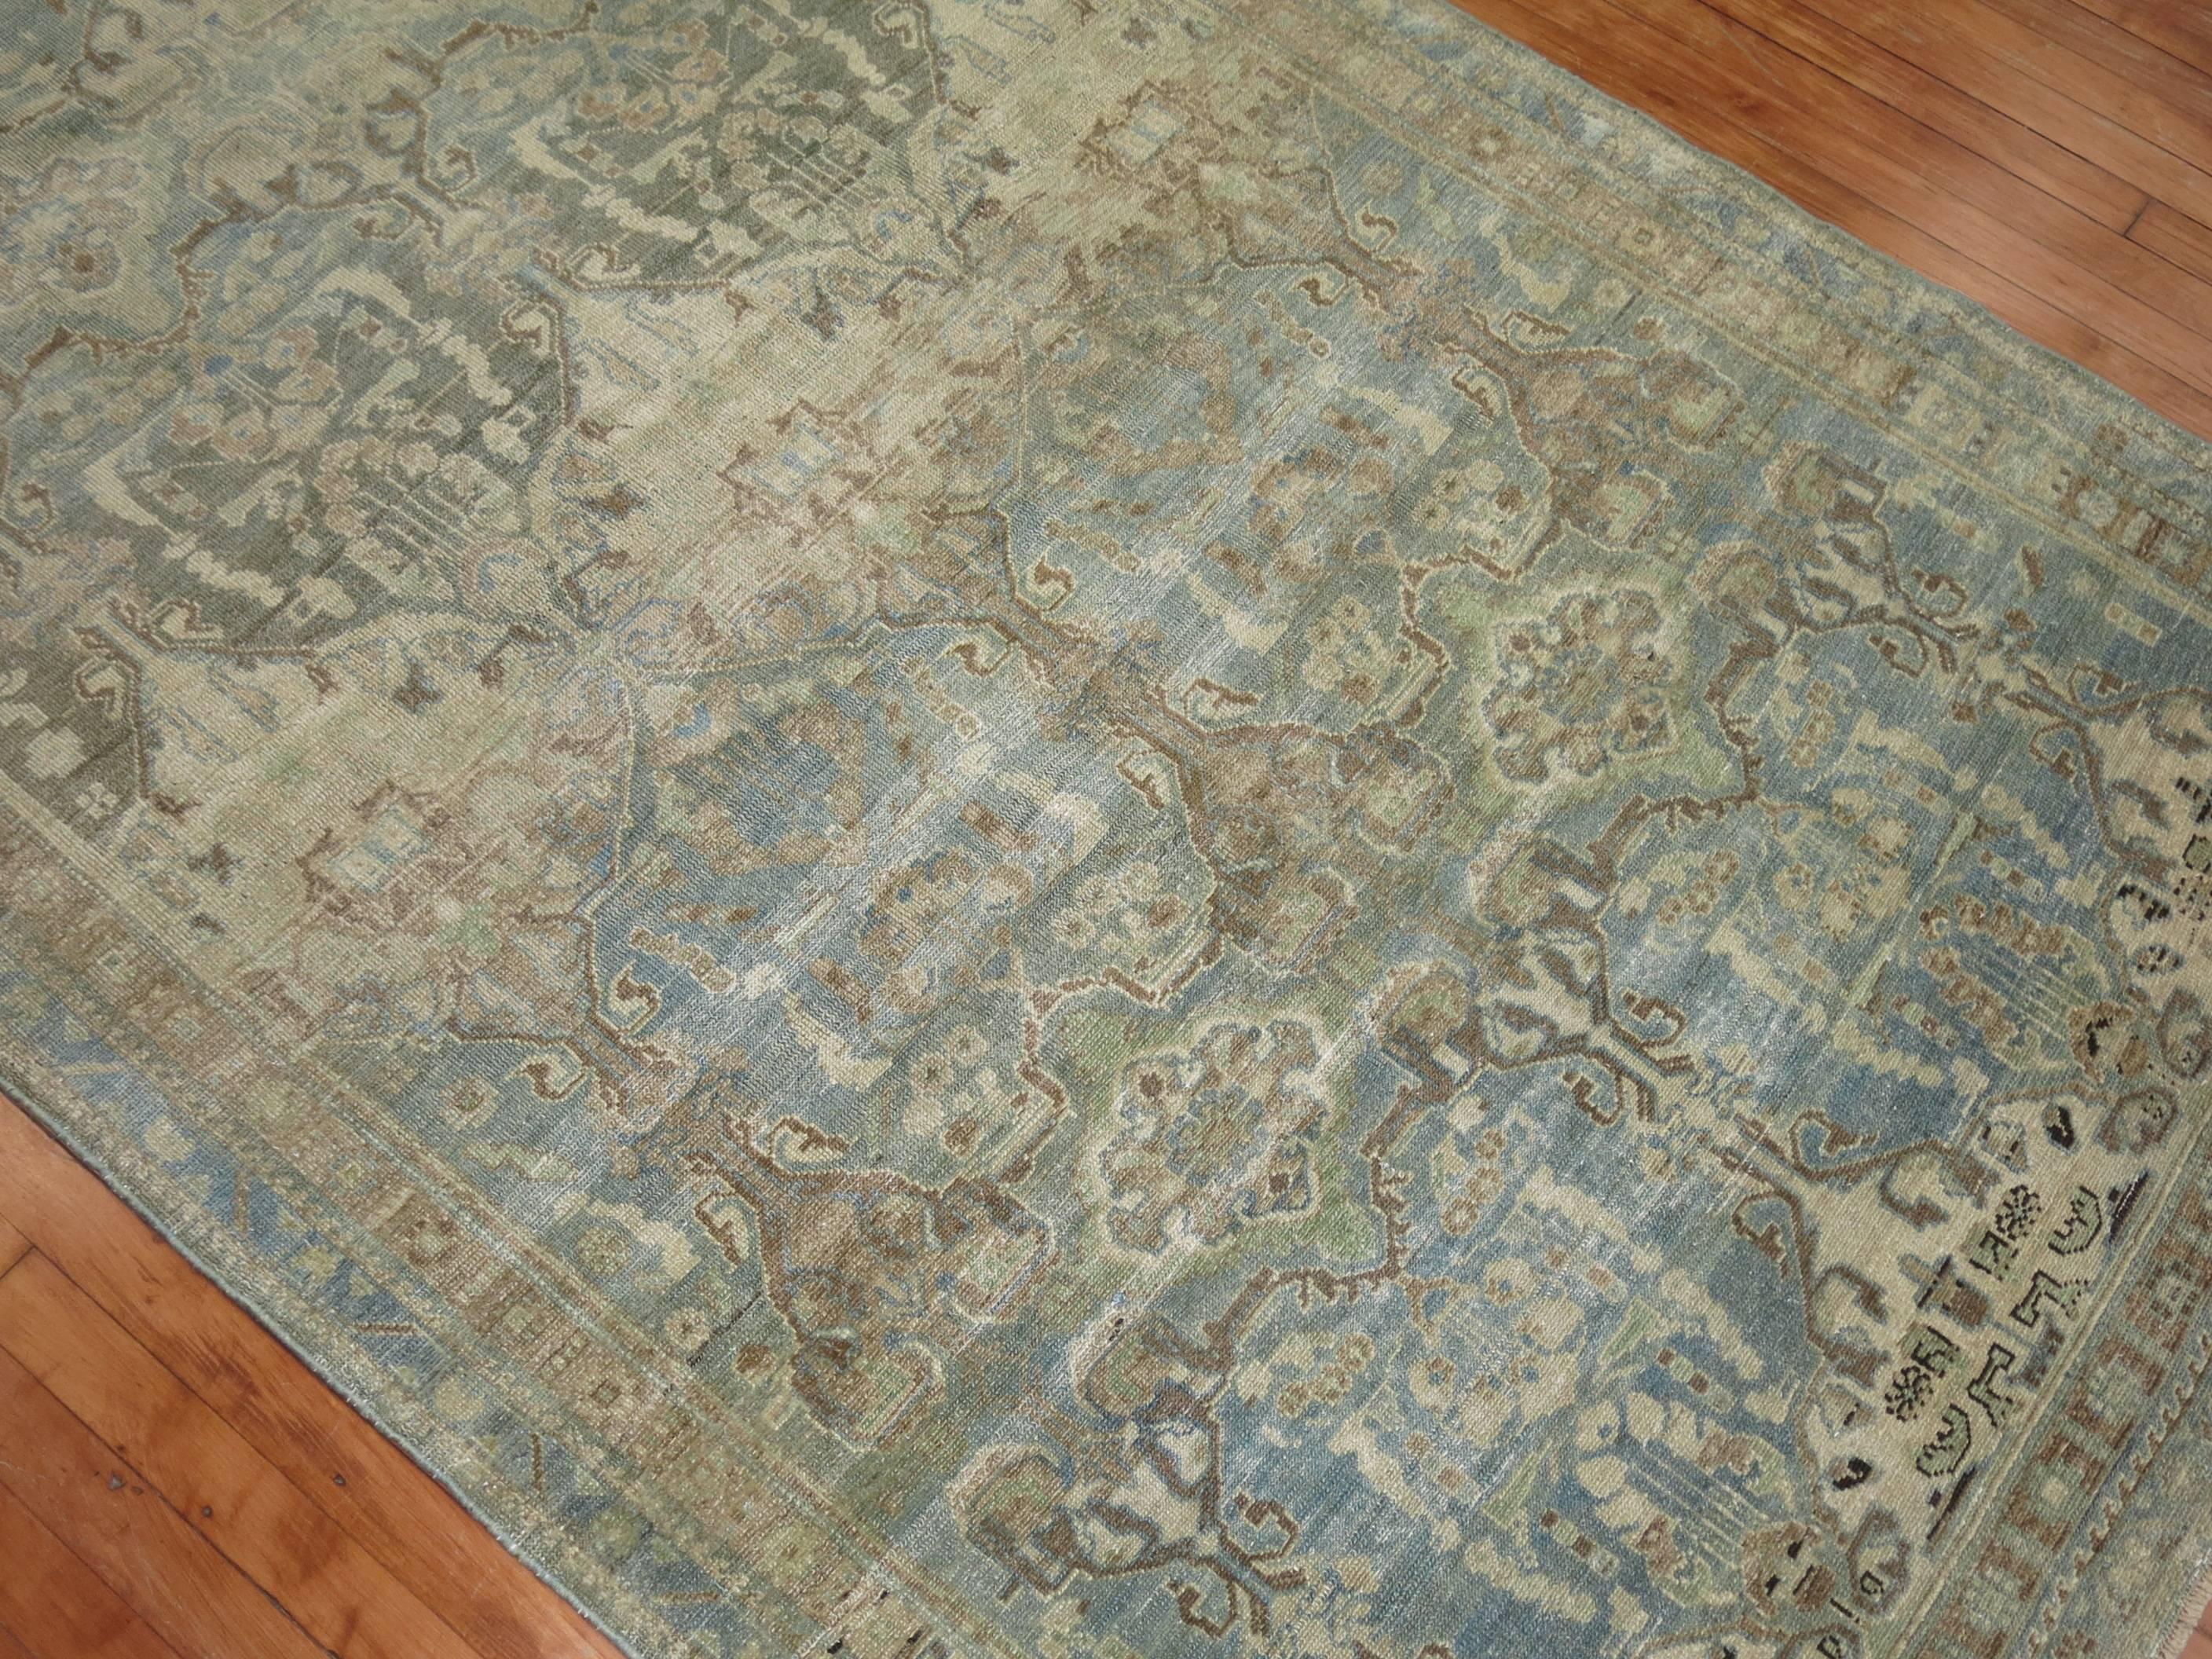 An early 20th century Persian Malayer in predominant pale blues, green and brown.


Antique Malayer rugs are unique in the diversity of design and color that is somewhat different than other antique Persian rugs. They come in different designs